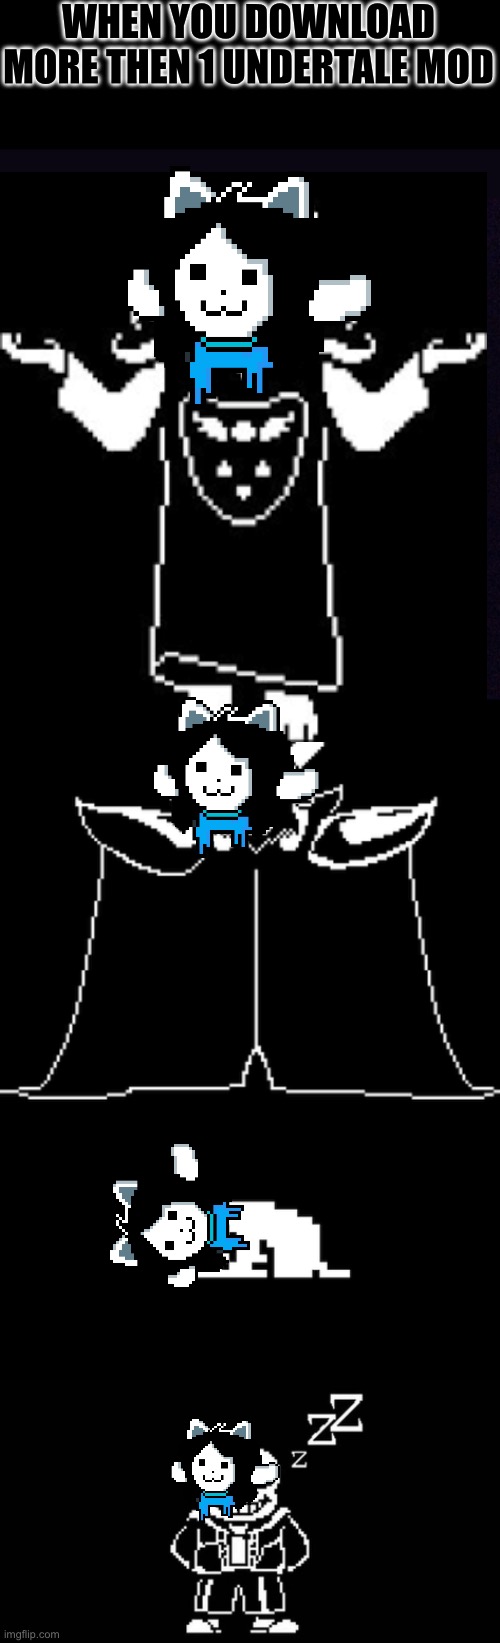 Temmie overload | WHEN YOU DOWNLOAD MORE THEN 1 UNDERTALE MOD | image tagged in black screen,undertale | made w/ Imgflip meme maker